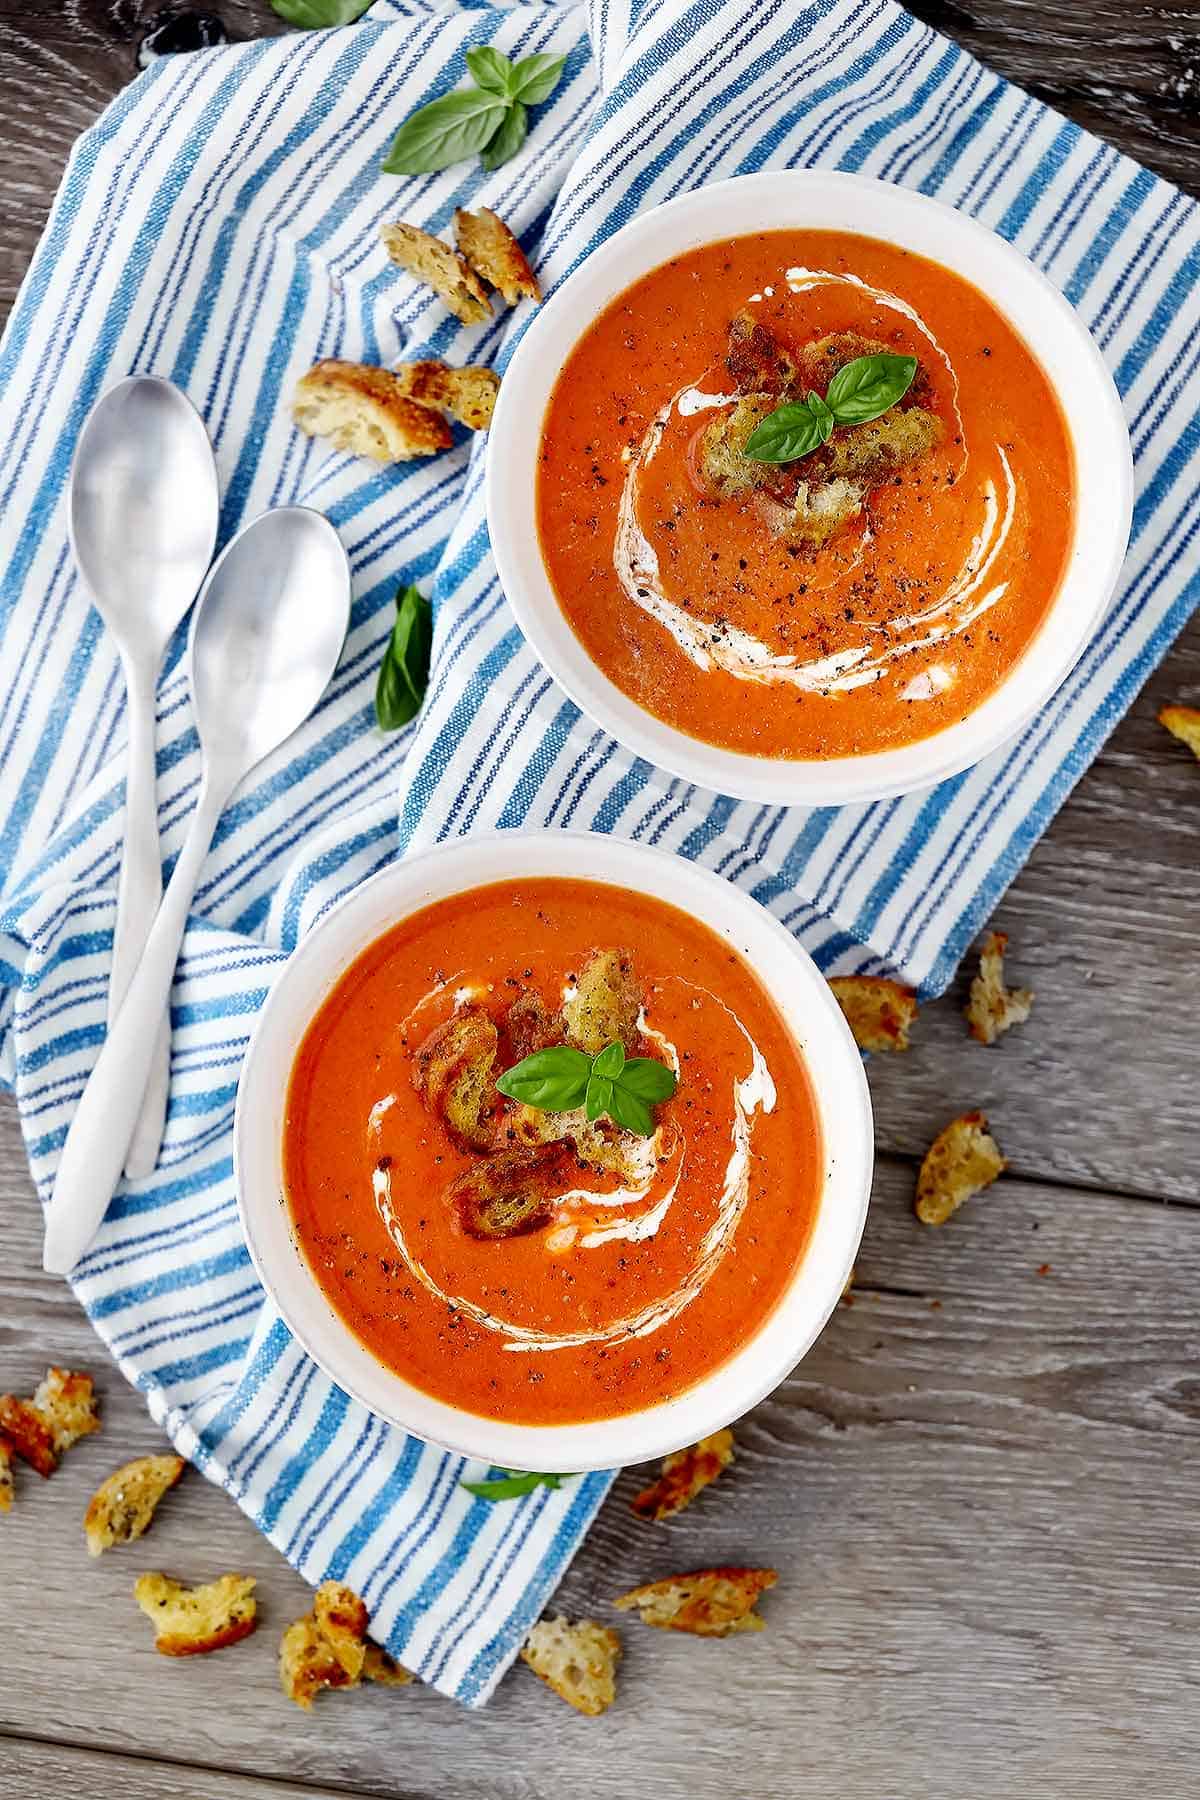 Overhead photo of two bowls of roasted red pepper and tomato soup on a towel with spoons